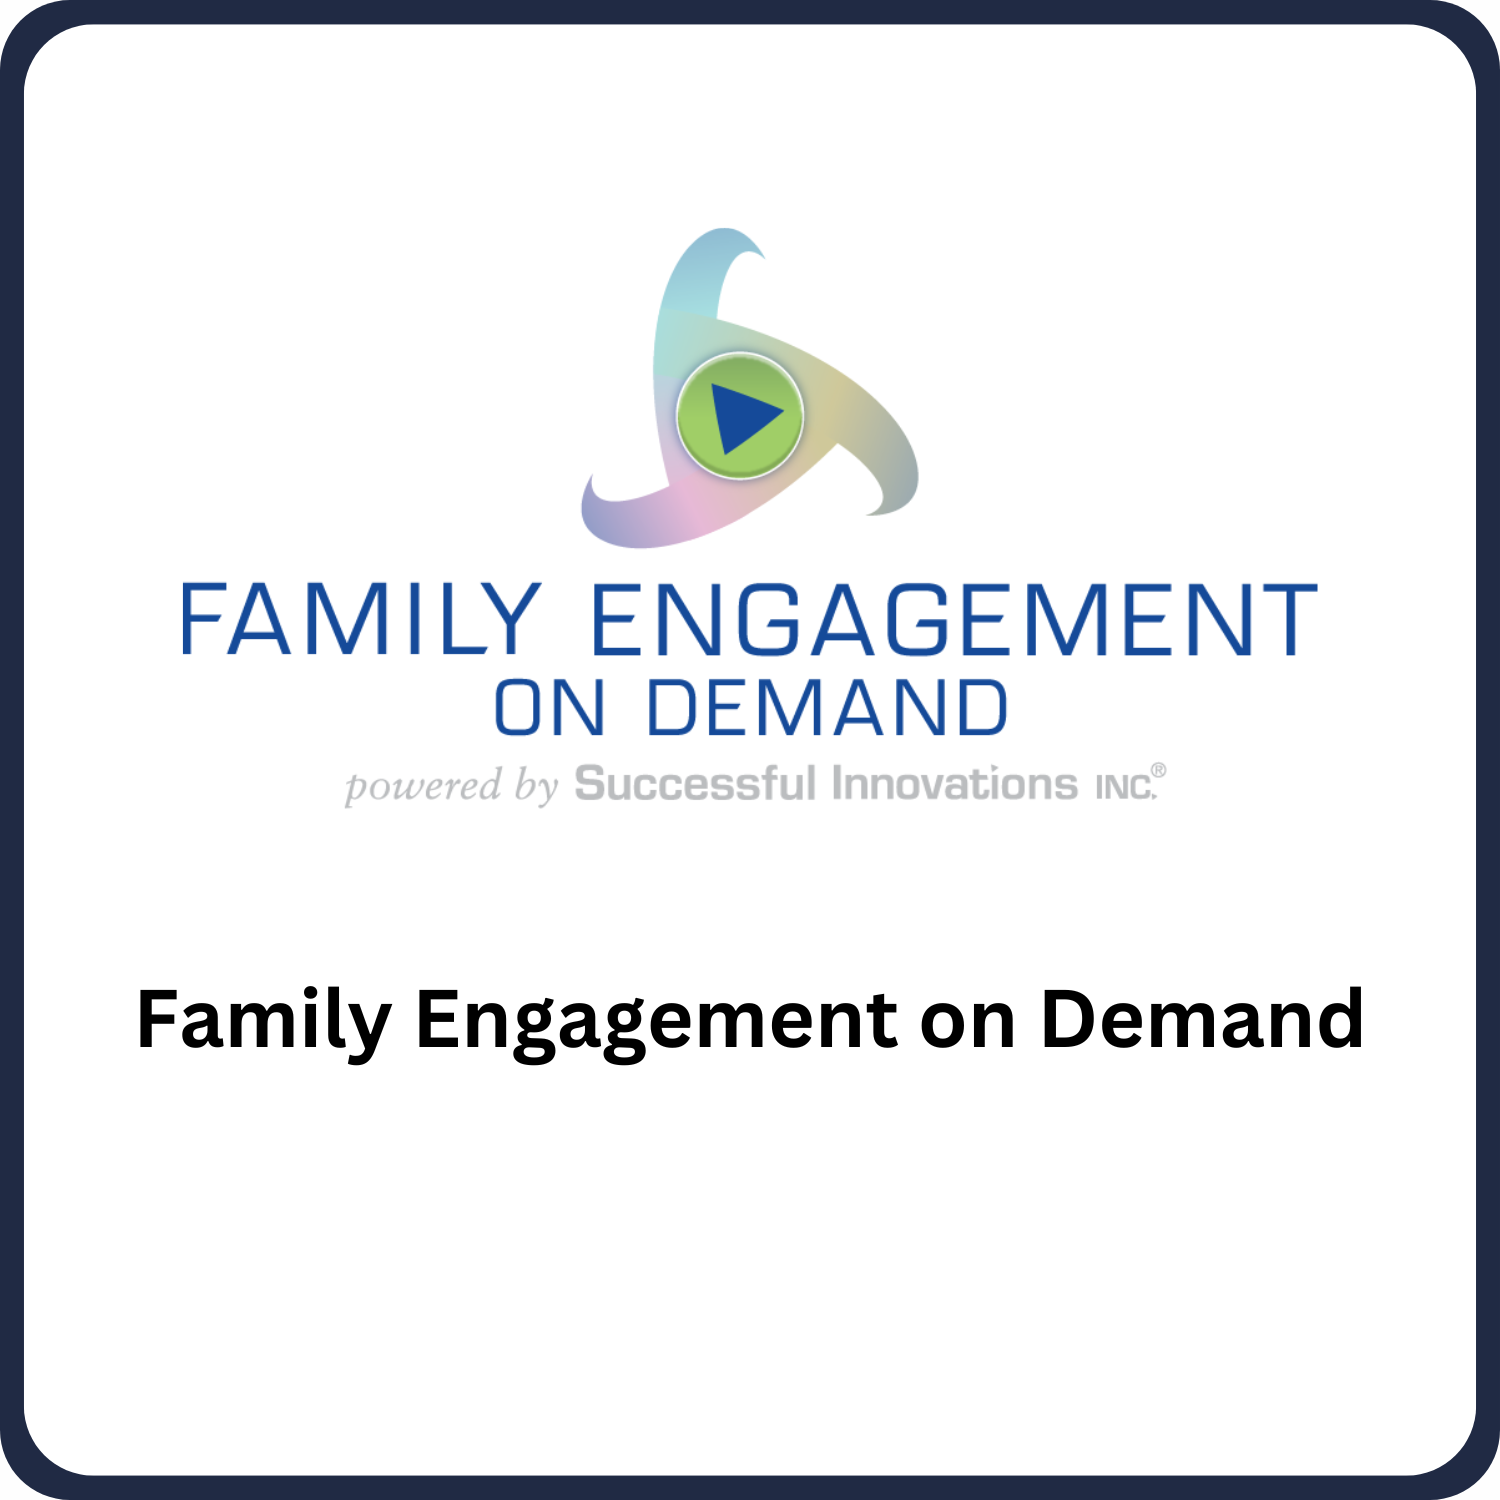 Family Engagement on Demand